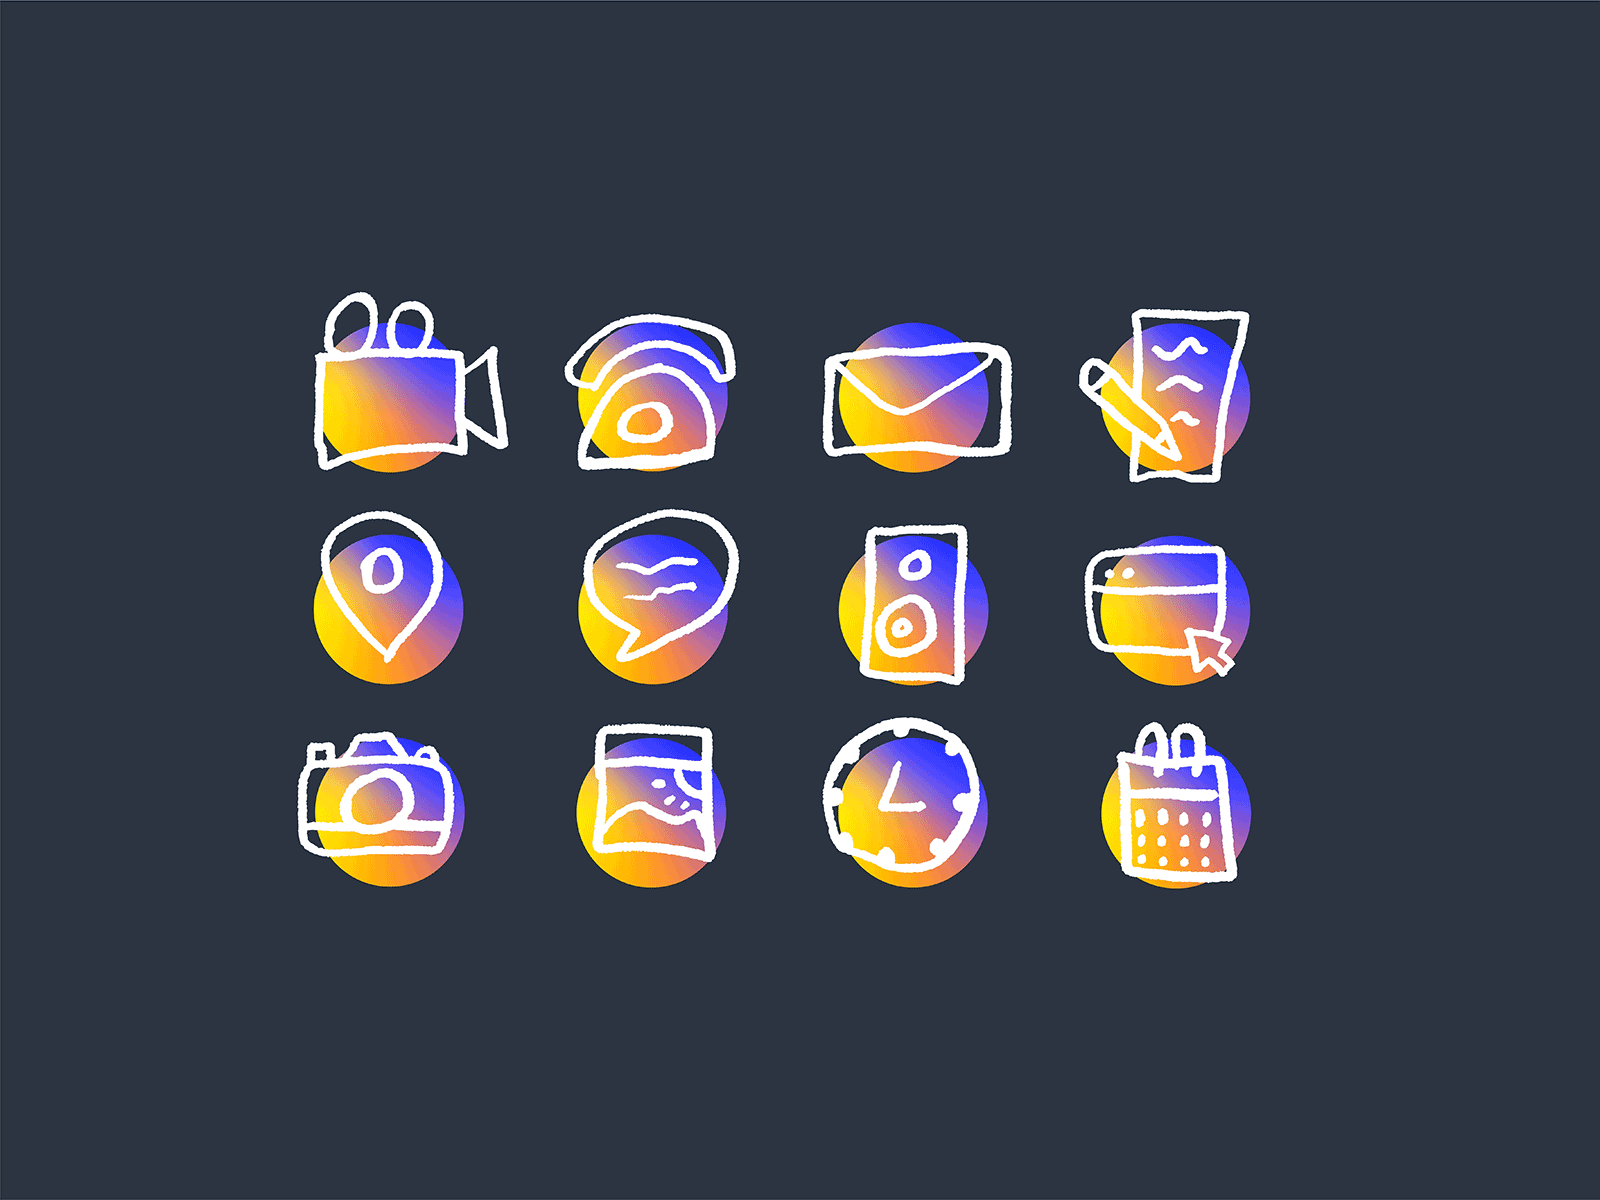 Day 005 - App Icon Set - Illustrative and Vector app icon app icons collection dailyui dailyui 005 doodle doodling gif group hand drawn illustration illustrator procreate set uidesign